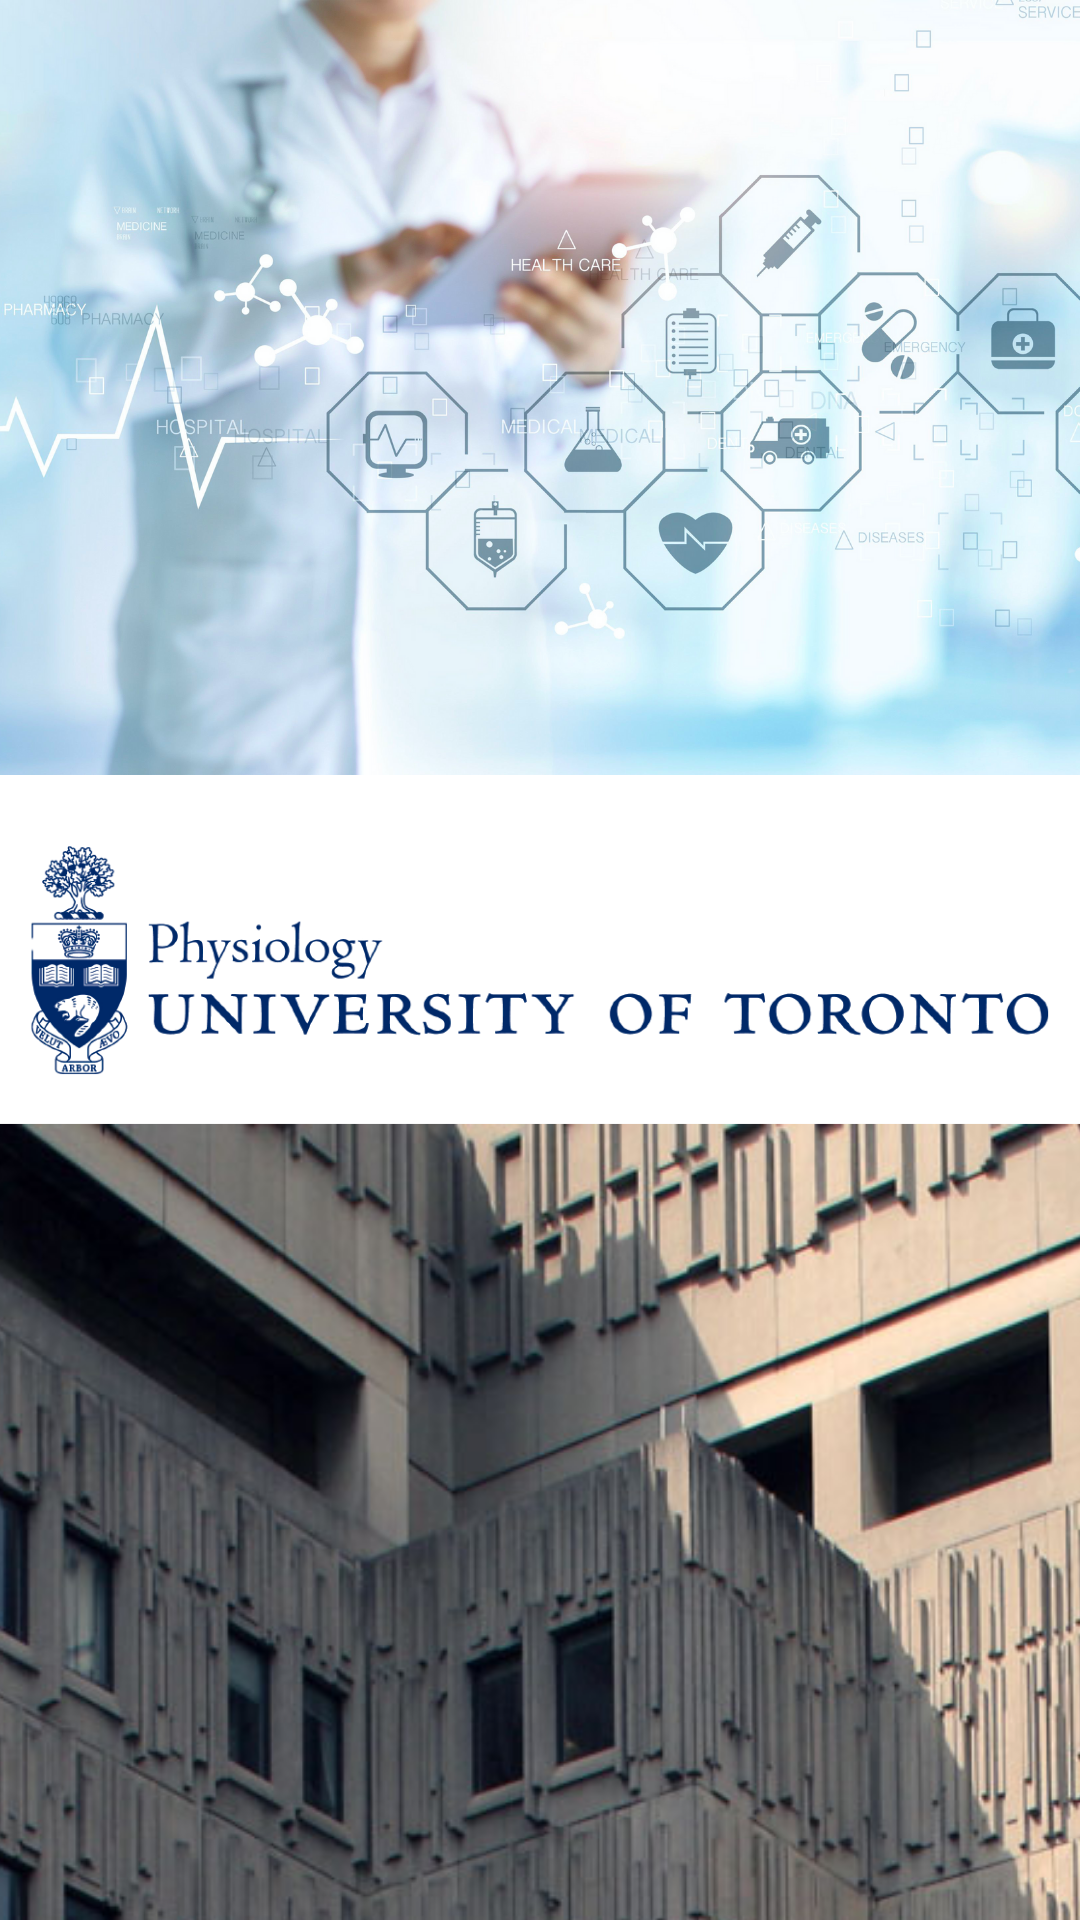 Showcase Image for University of Toronto Department of Physiology: MHSc, MSc, & PhD